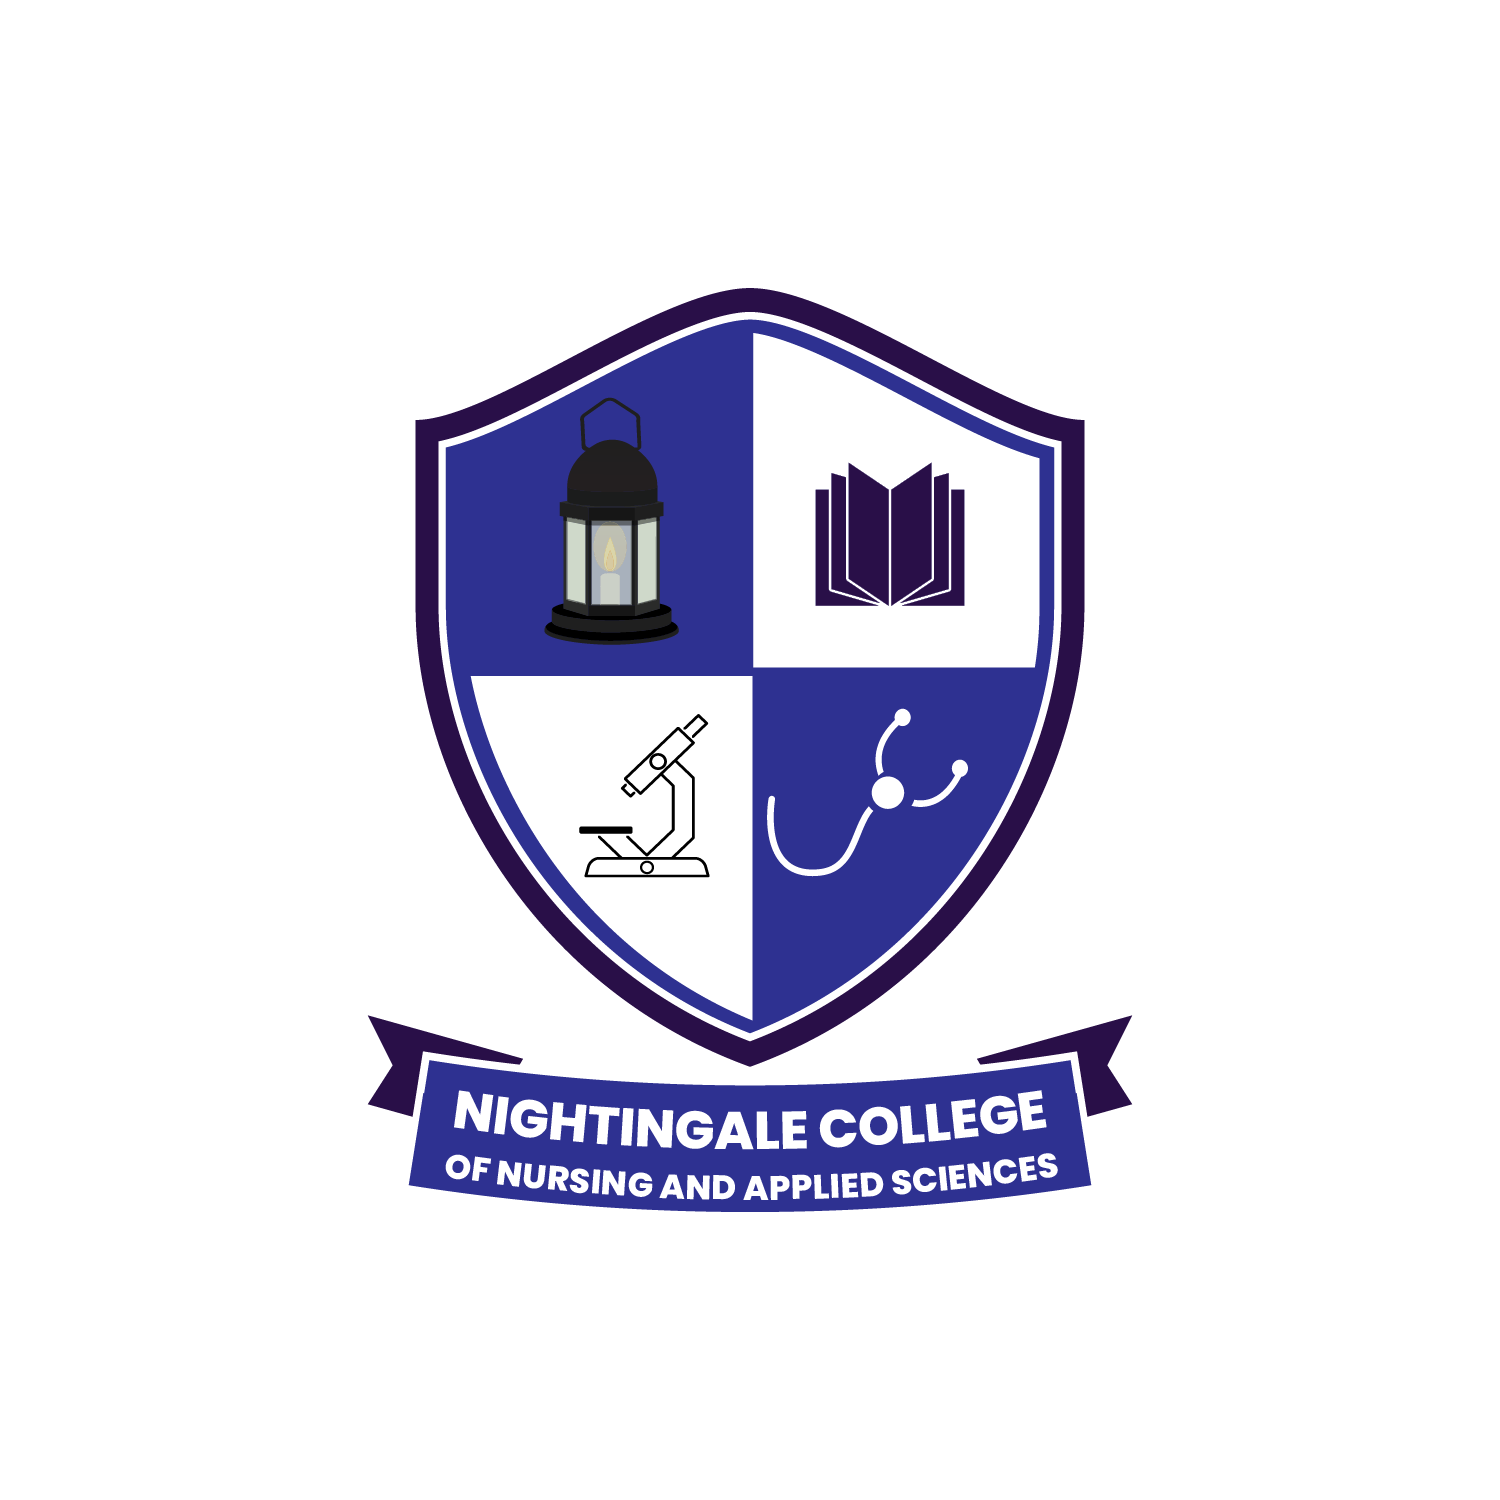 Home NIGHTINGALE COLLEGE OF NURSING AND APPLIED SCIENCES NIGHTINGALE